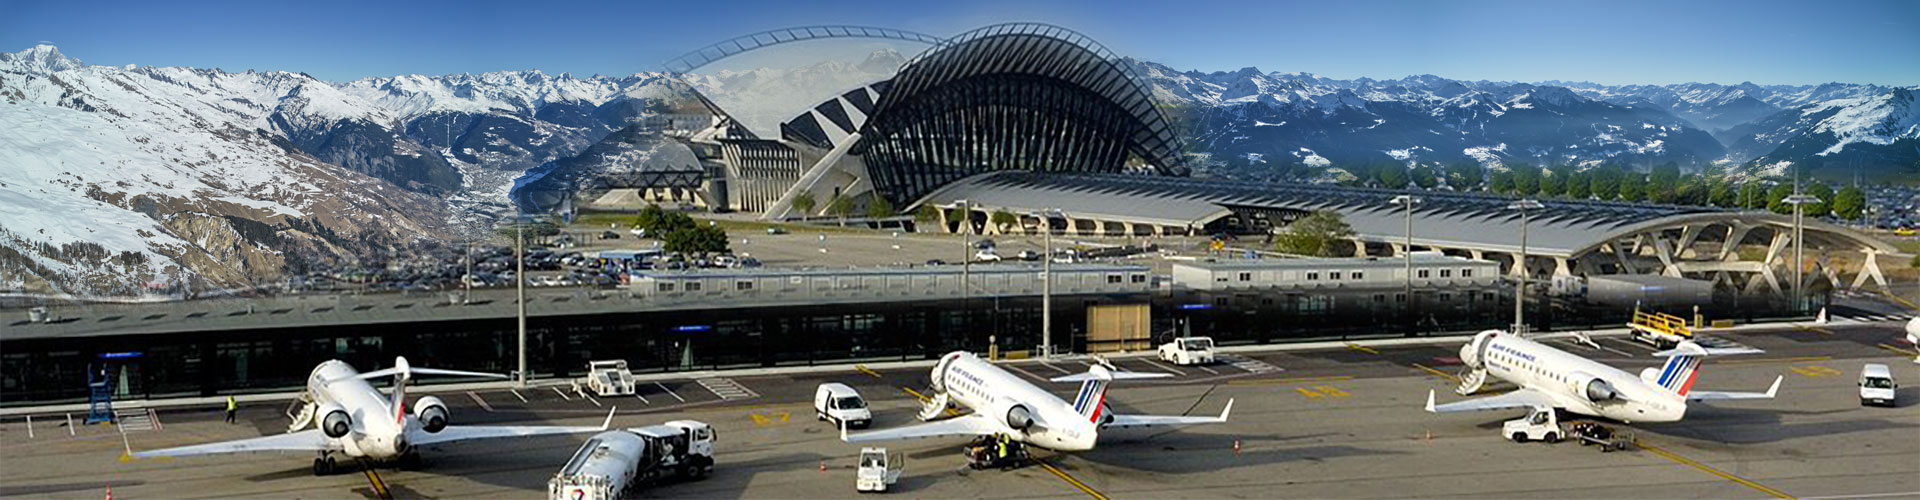 Taxi Lyon airport transfers to ski resort Val-d'Isere, La Daille and le Fornet